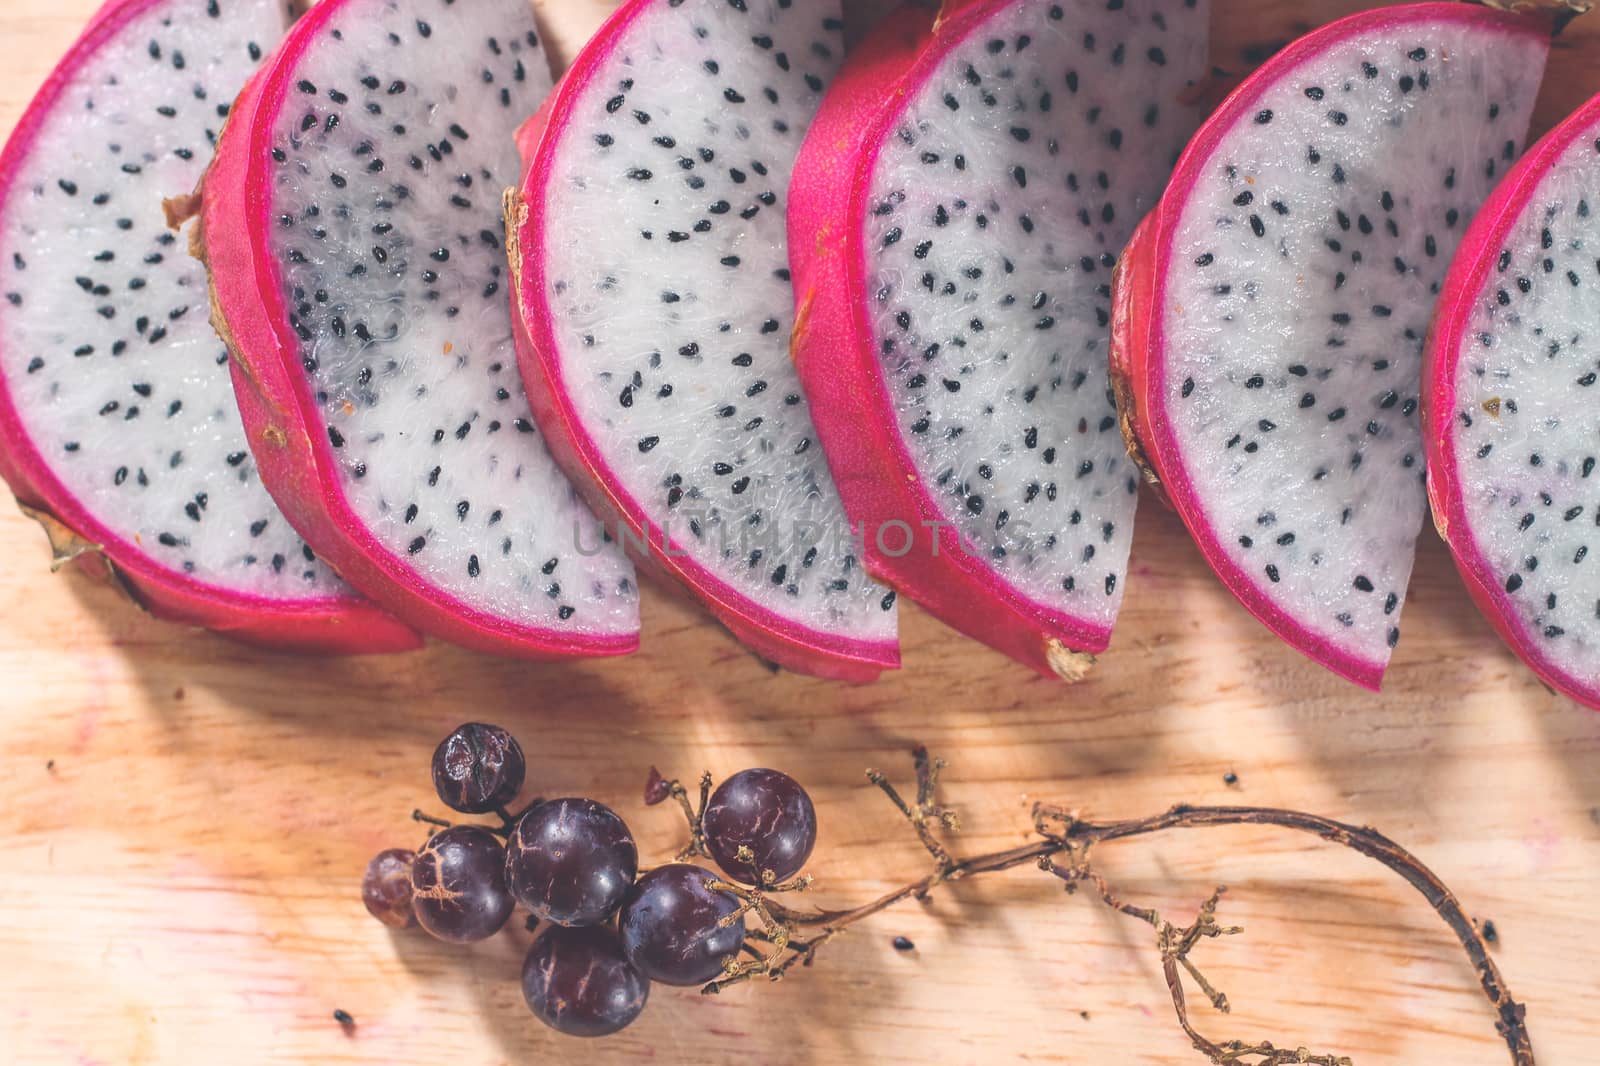 White dragon fruit slices by Sonnet15